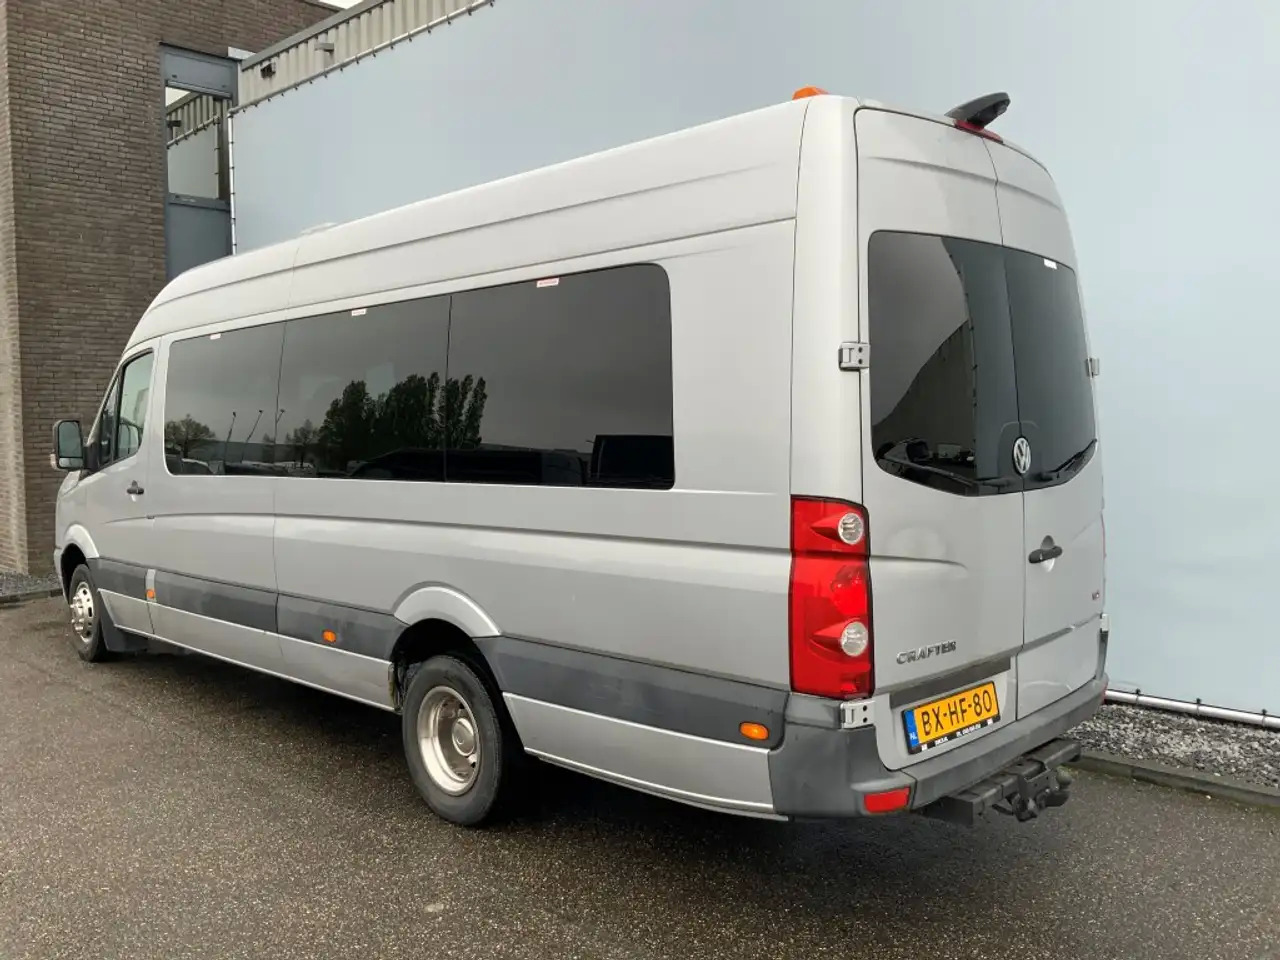 Leasing Volkswagen Crafter 35 2.5 TDI L4H3 PersoneBus 19 pers Airco CameraTre Volkswagen Crafter 35 2.5 TDI L4H3 PersoneBus 19 pers Airco CameraTre: kuva Leasing Volkswagen Crafter 35 2.5 TDI L4H3 PersoneBus 19 pers Airco CameraTre Volkswagen Crafter 35 2.5 TDI L4H3 PersoneBus 19 pers Airco CameraTre